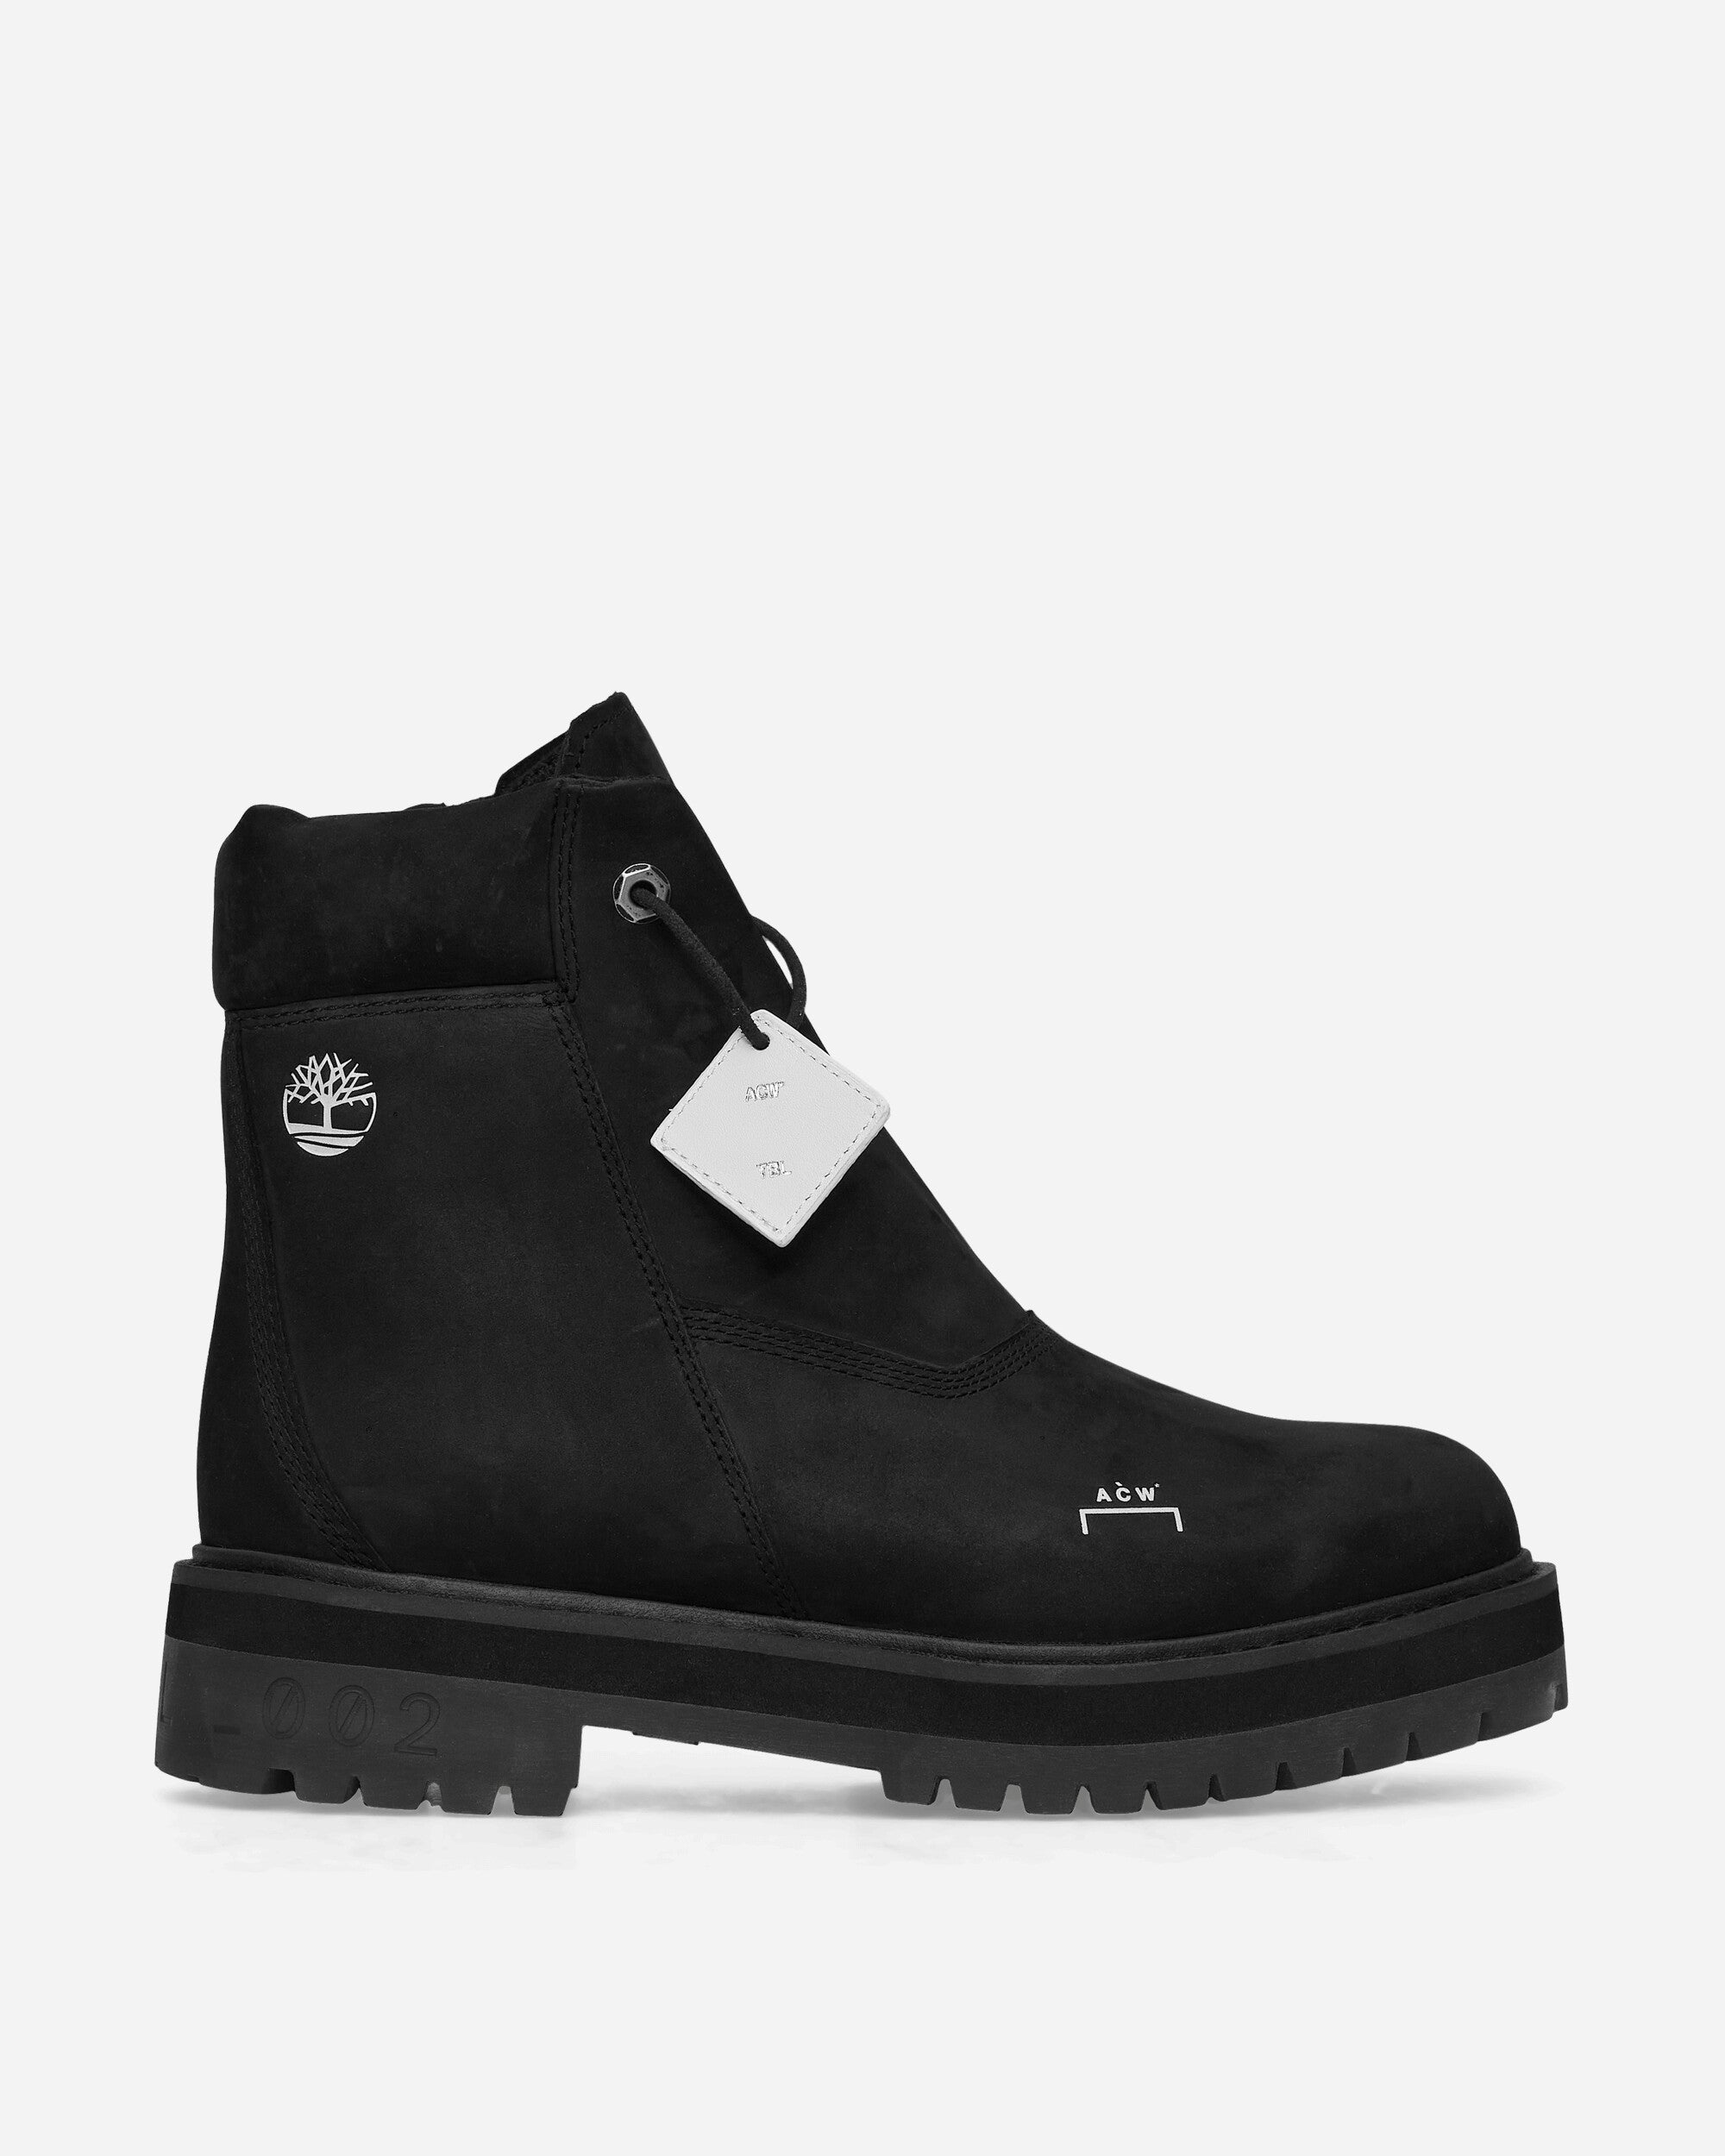 A-COLD-WALL* Future73 6-Inch Zip Boots Black